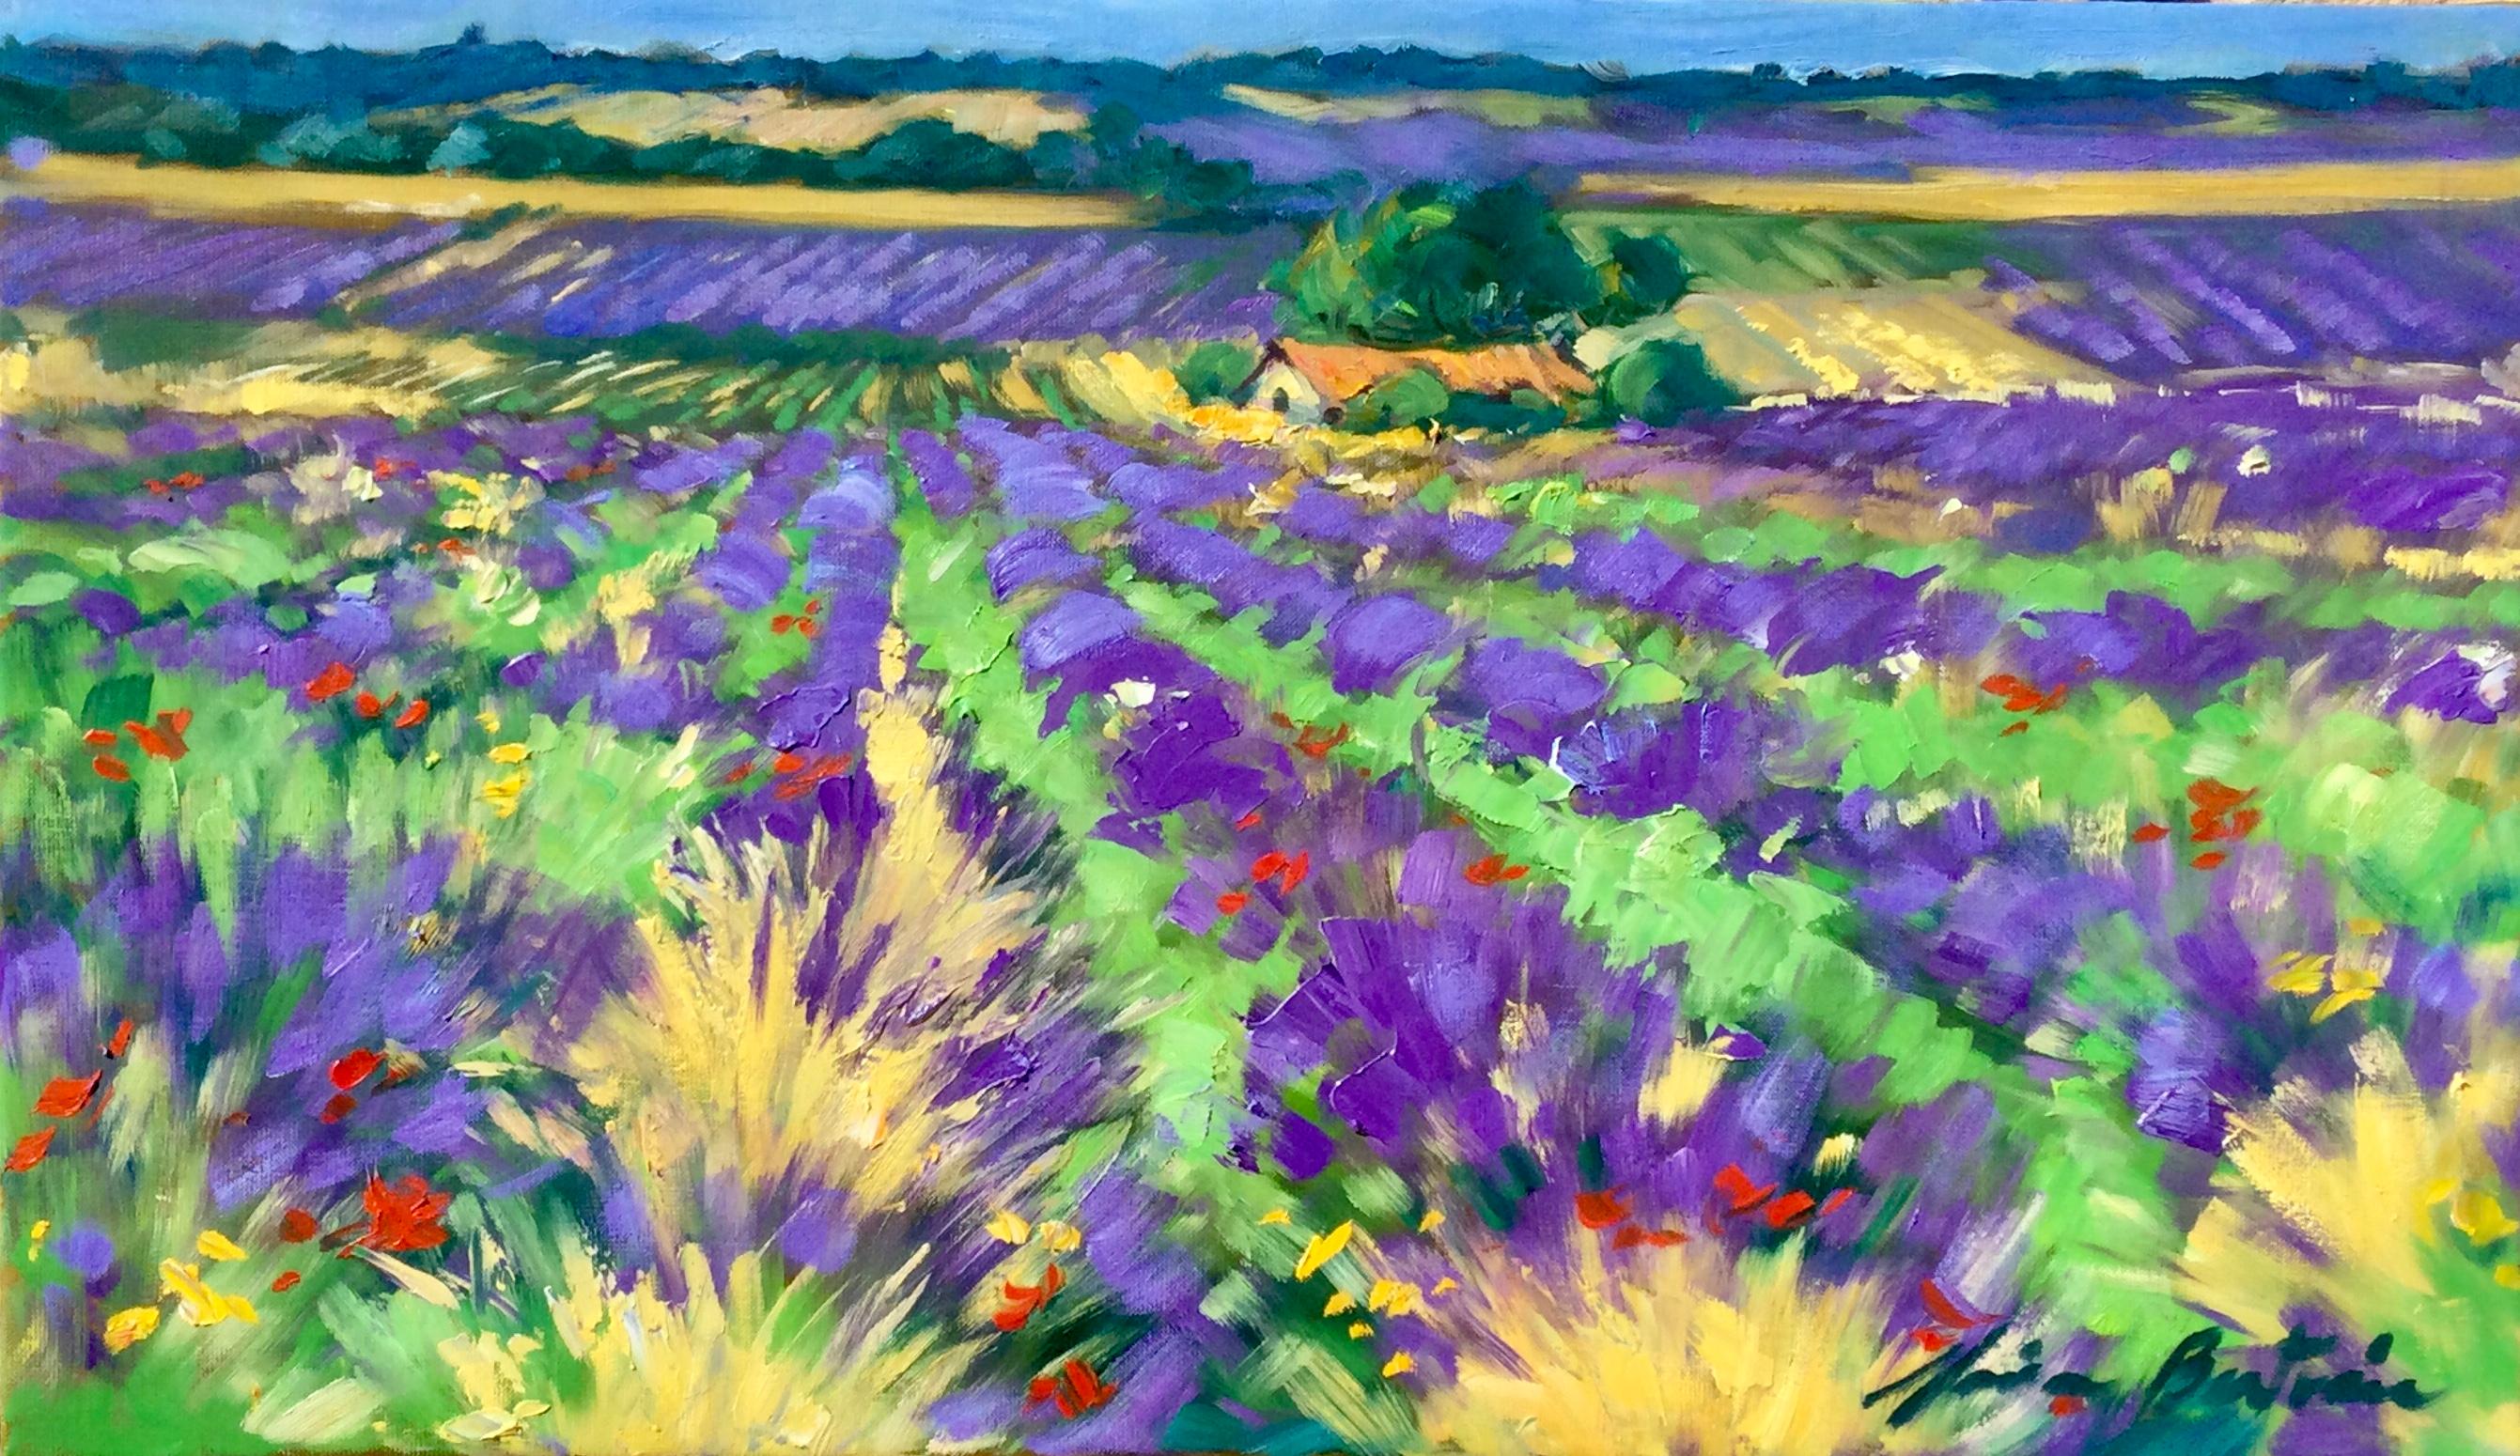 Maria Bertrán Landscape Painting - "Albion Plateau Lavender Fields" Contemporary Impressionist Painting, Provence 